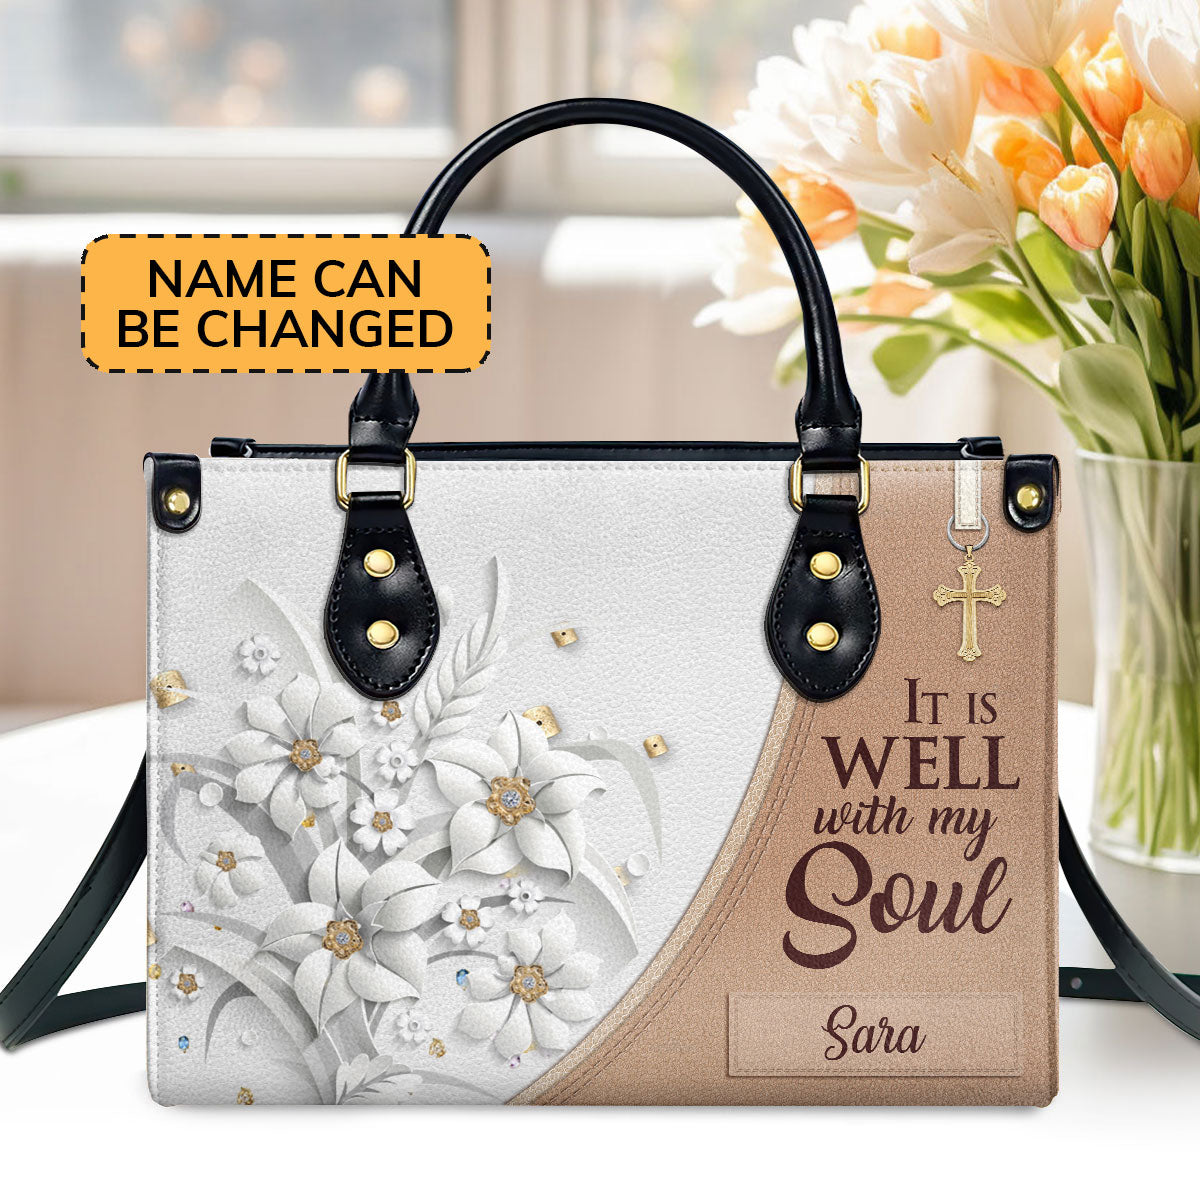 Beautiful Personalized Leather Handbag - It Is Well With My Soul NUH336